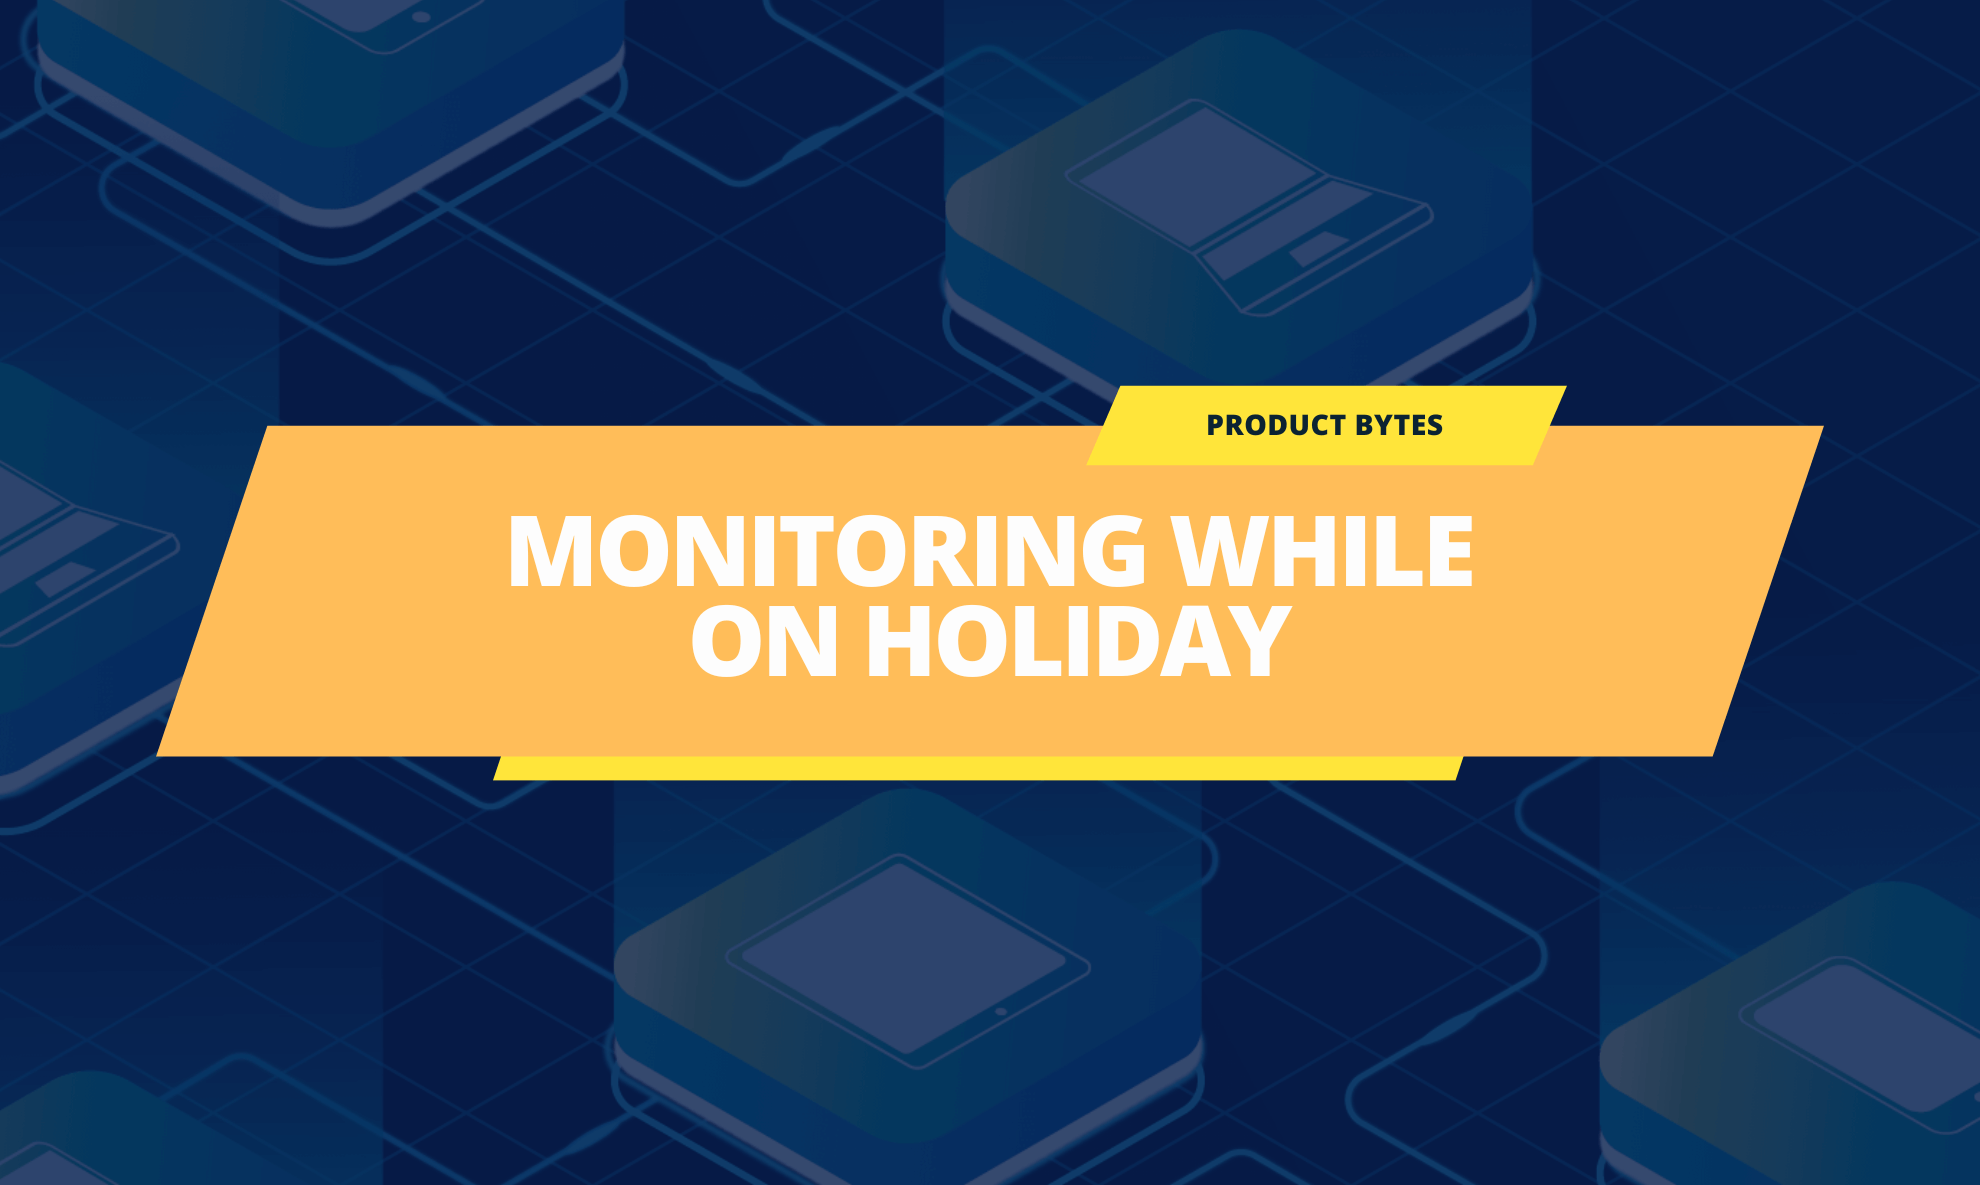 7 Tips to Monitor Your Network While on Holiday